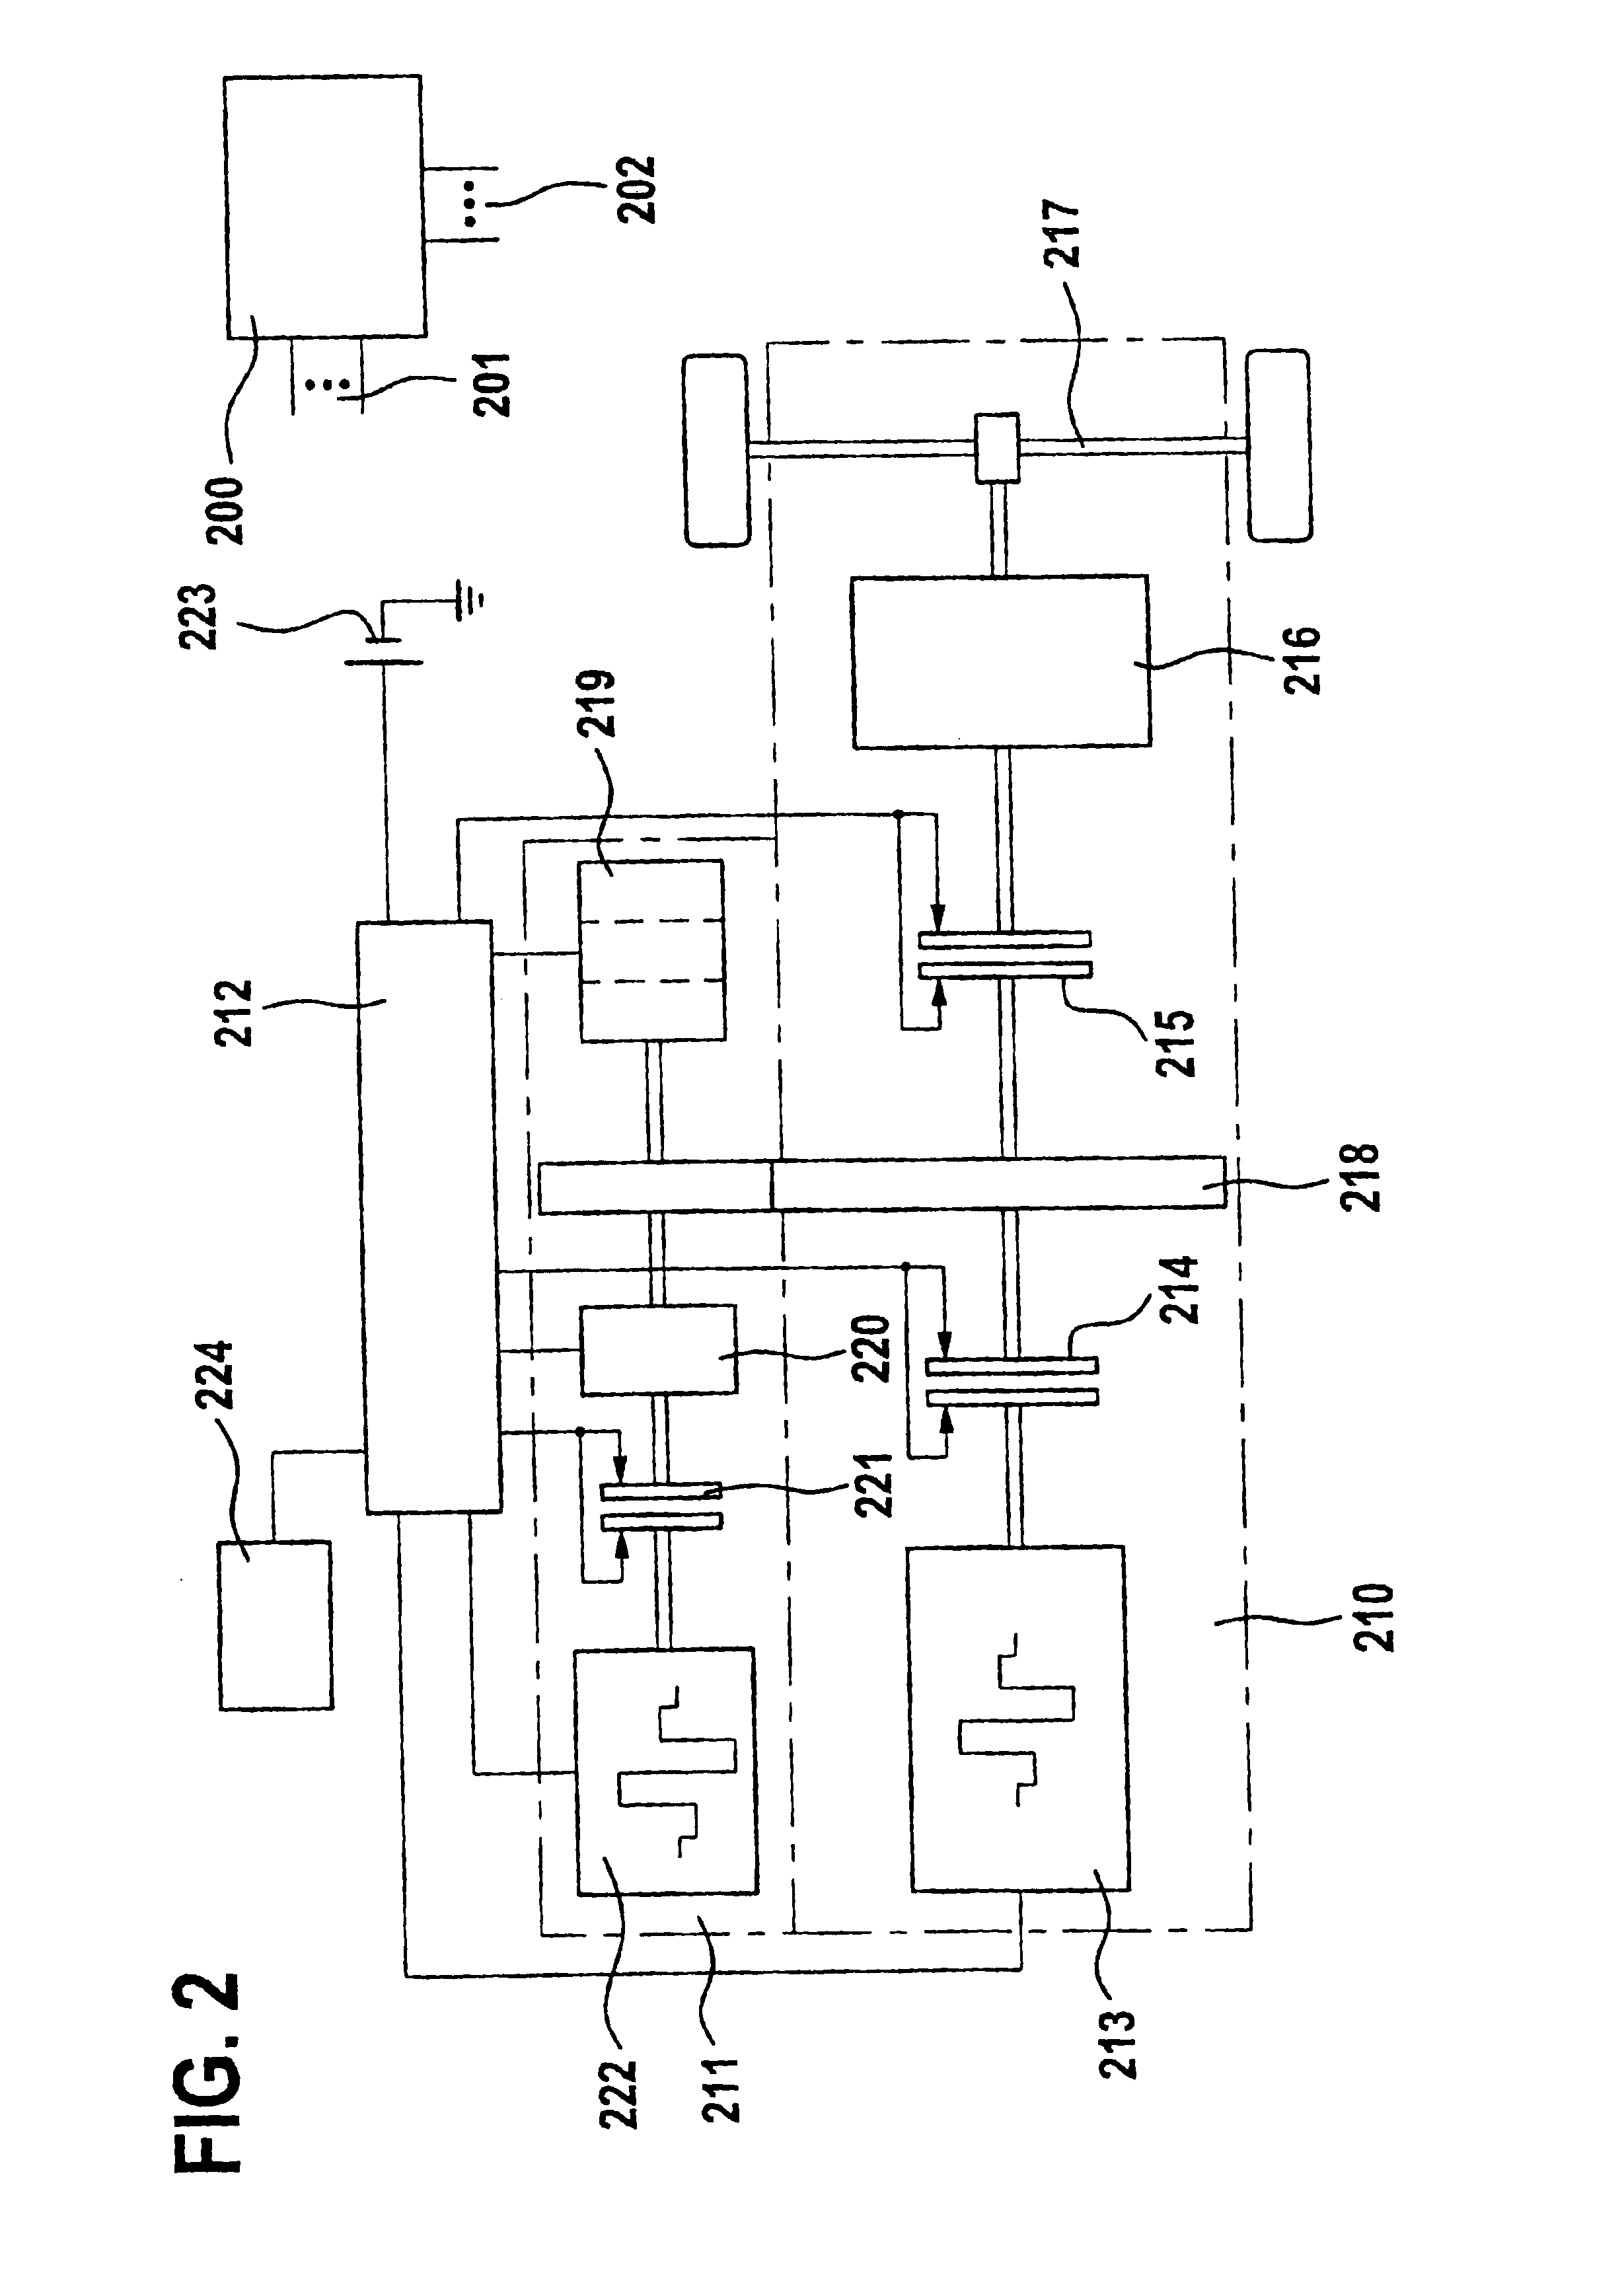 Method and device for controlling units in a vehicle according to the level of noise